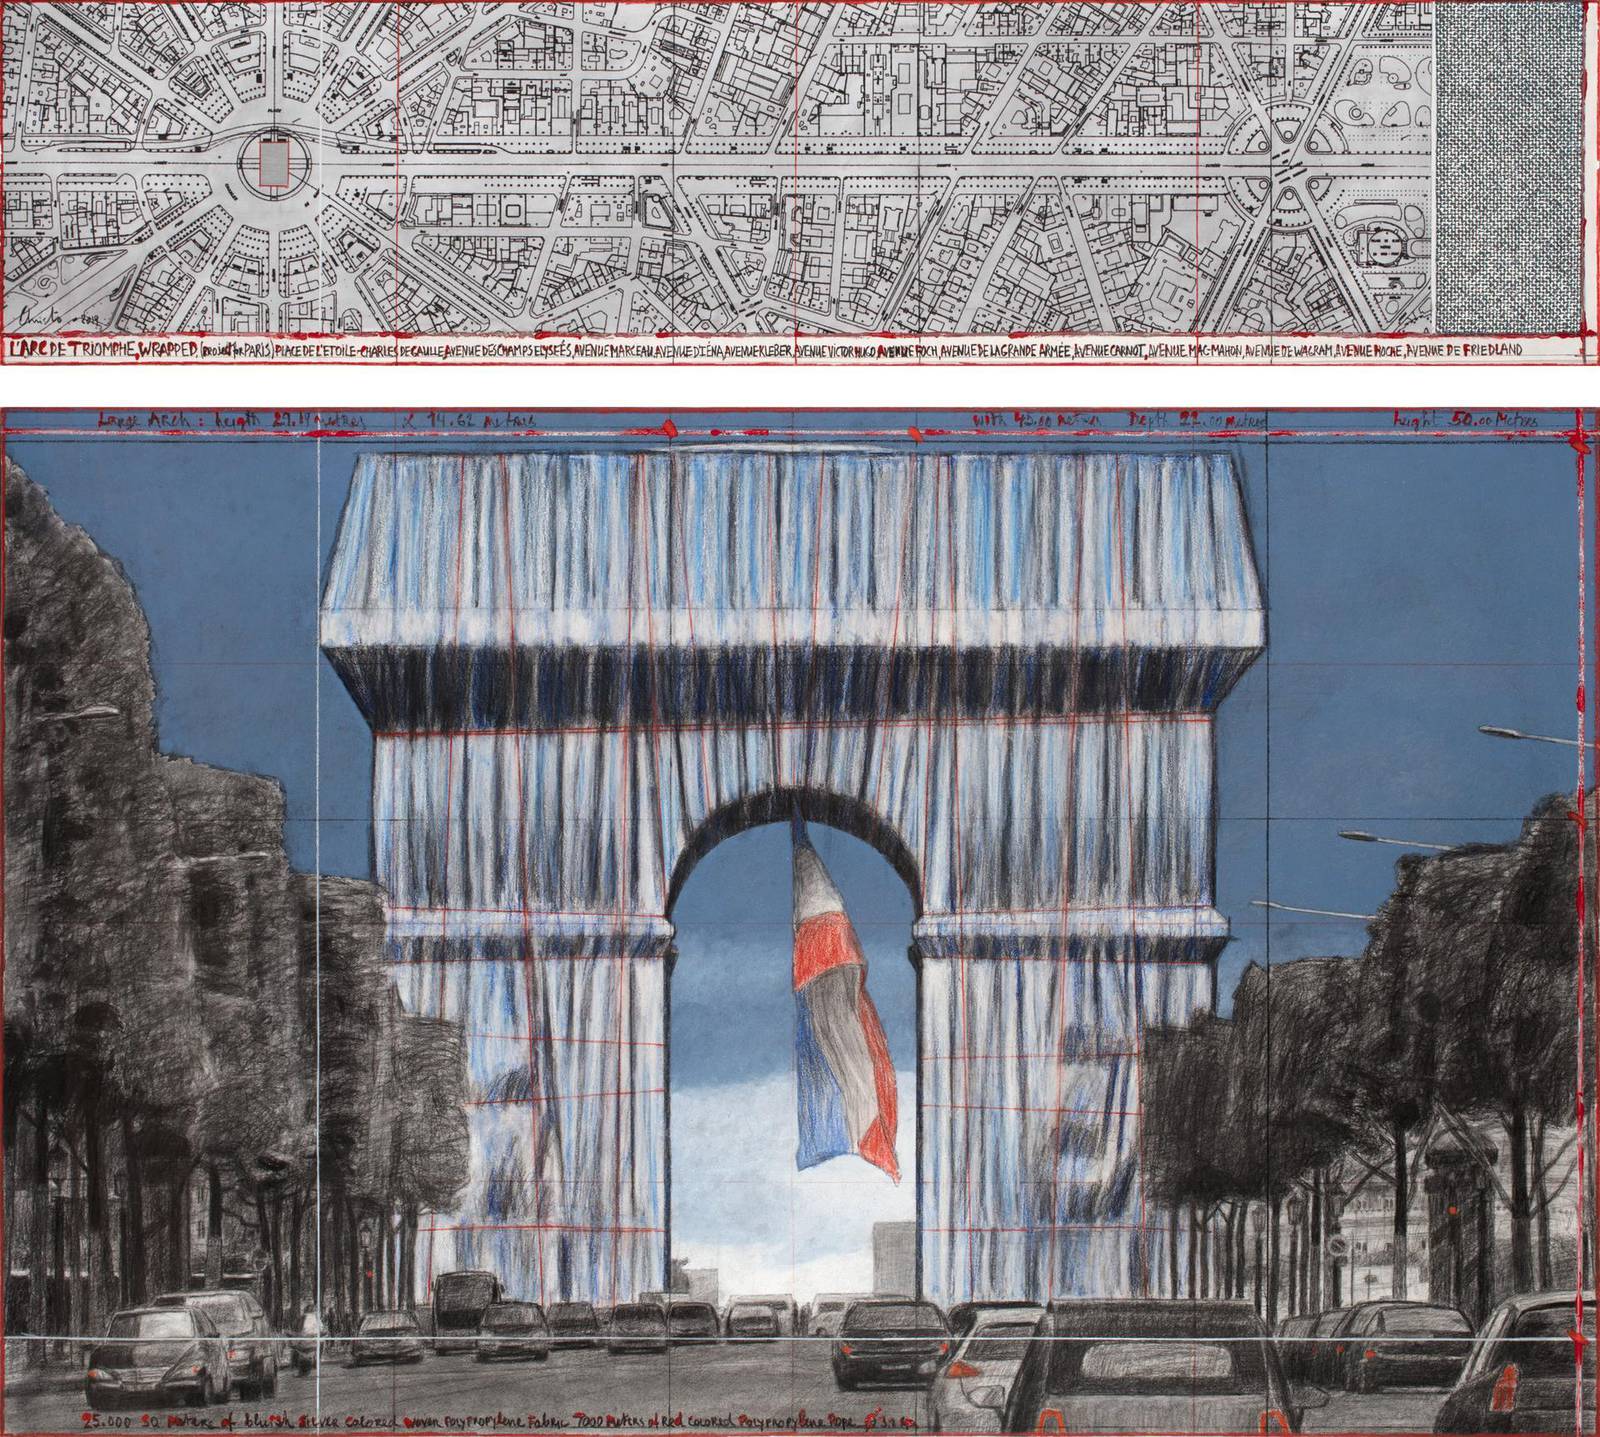 why is the arc of triomphe covered L'arc de triomphe in paris to be
wrapped in fabric to honour late